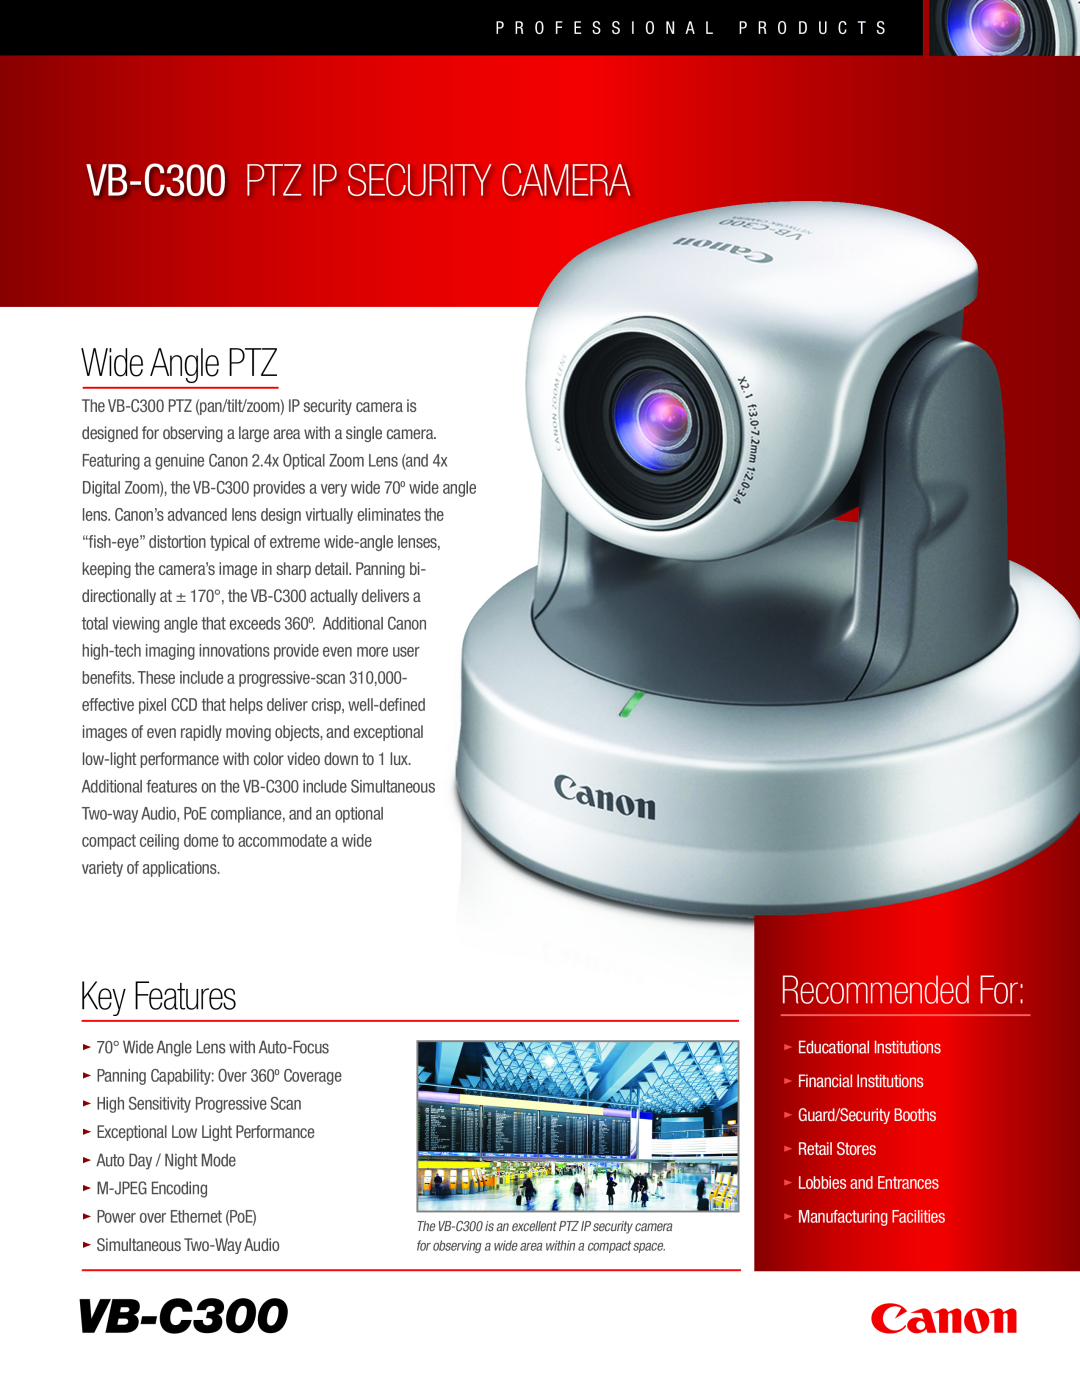 Canon VB-C300 manual Wide Angle PTZ, P R O F E S S I O N A L P R O D U C T S, Guard/Security Booths Retail Stores 